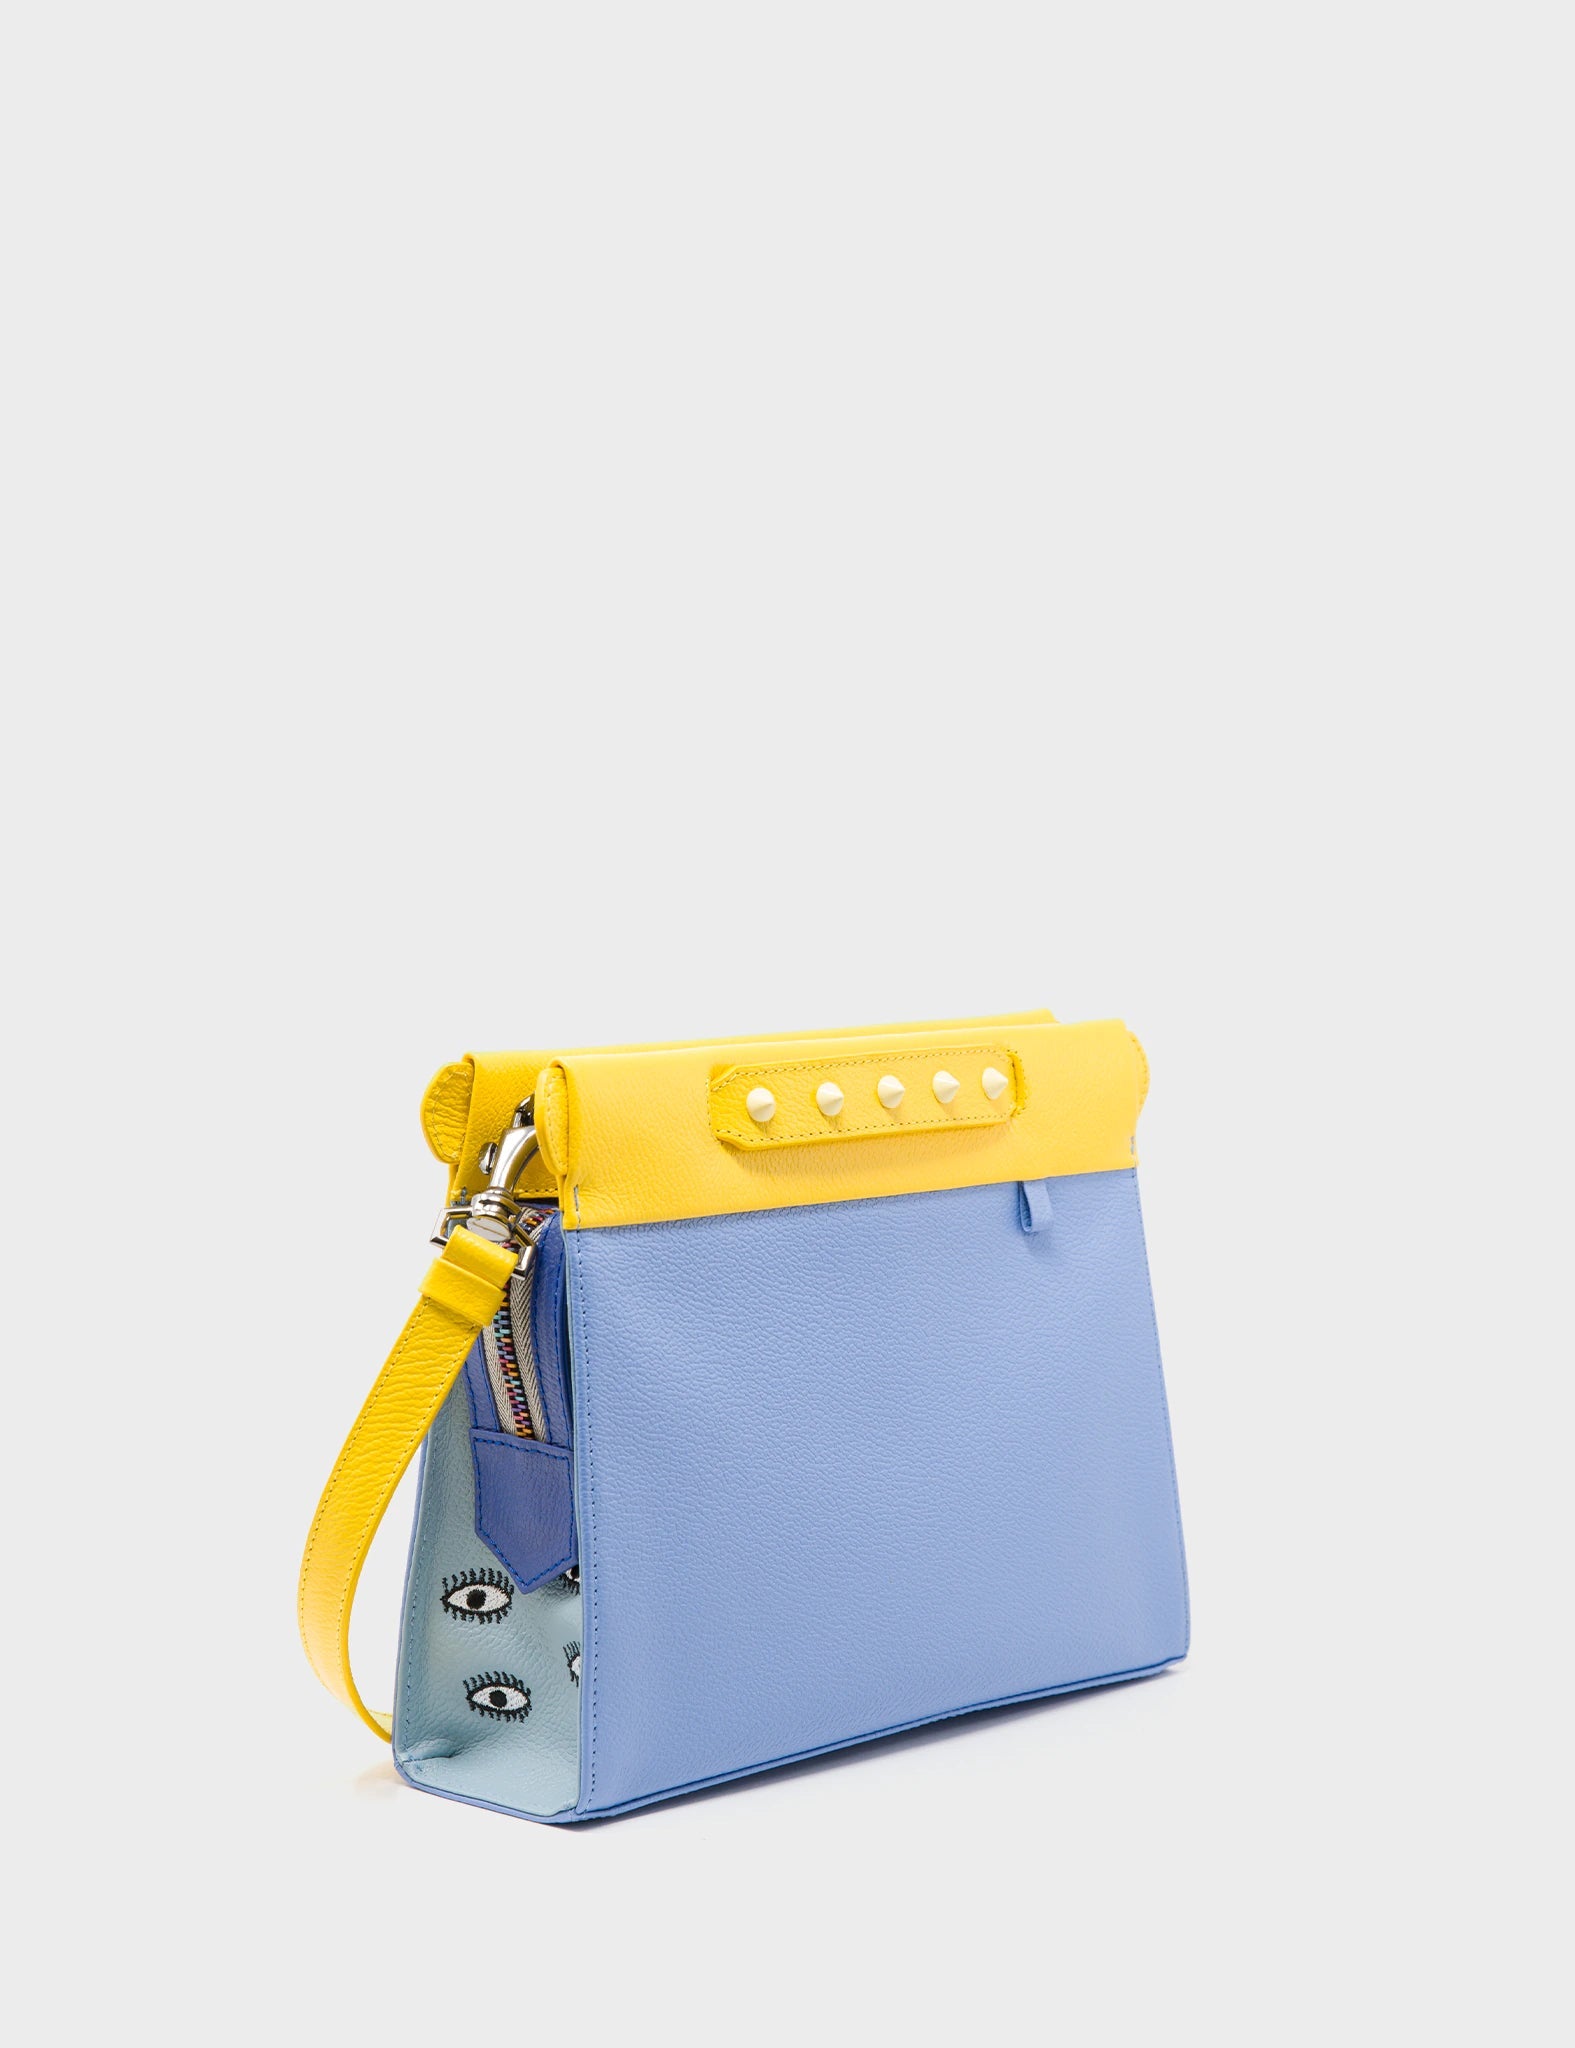 Crossbody Small Blue and Yellow Leather Bag - Eyes Embroidery